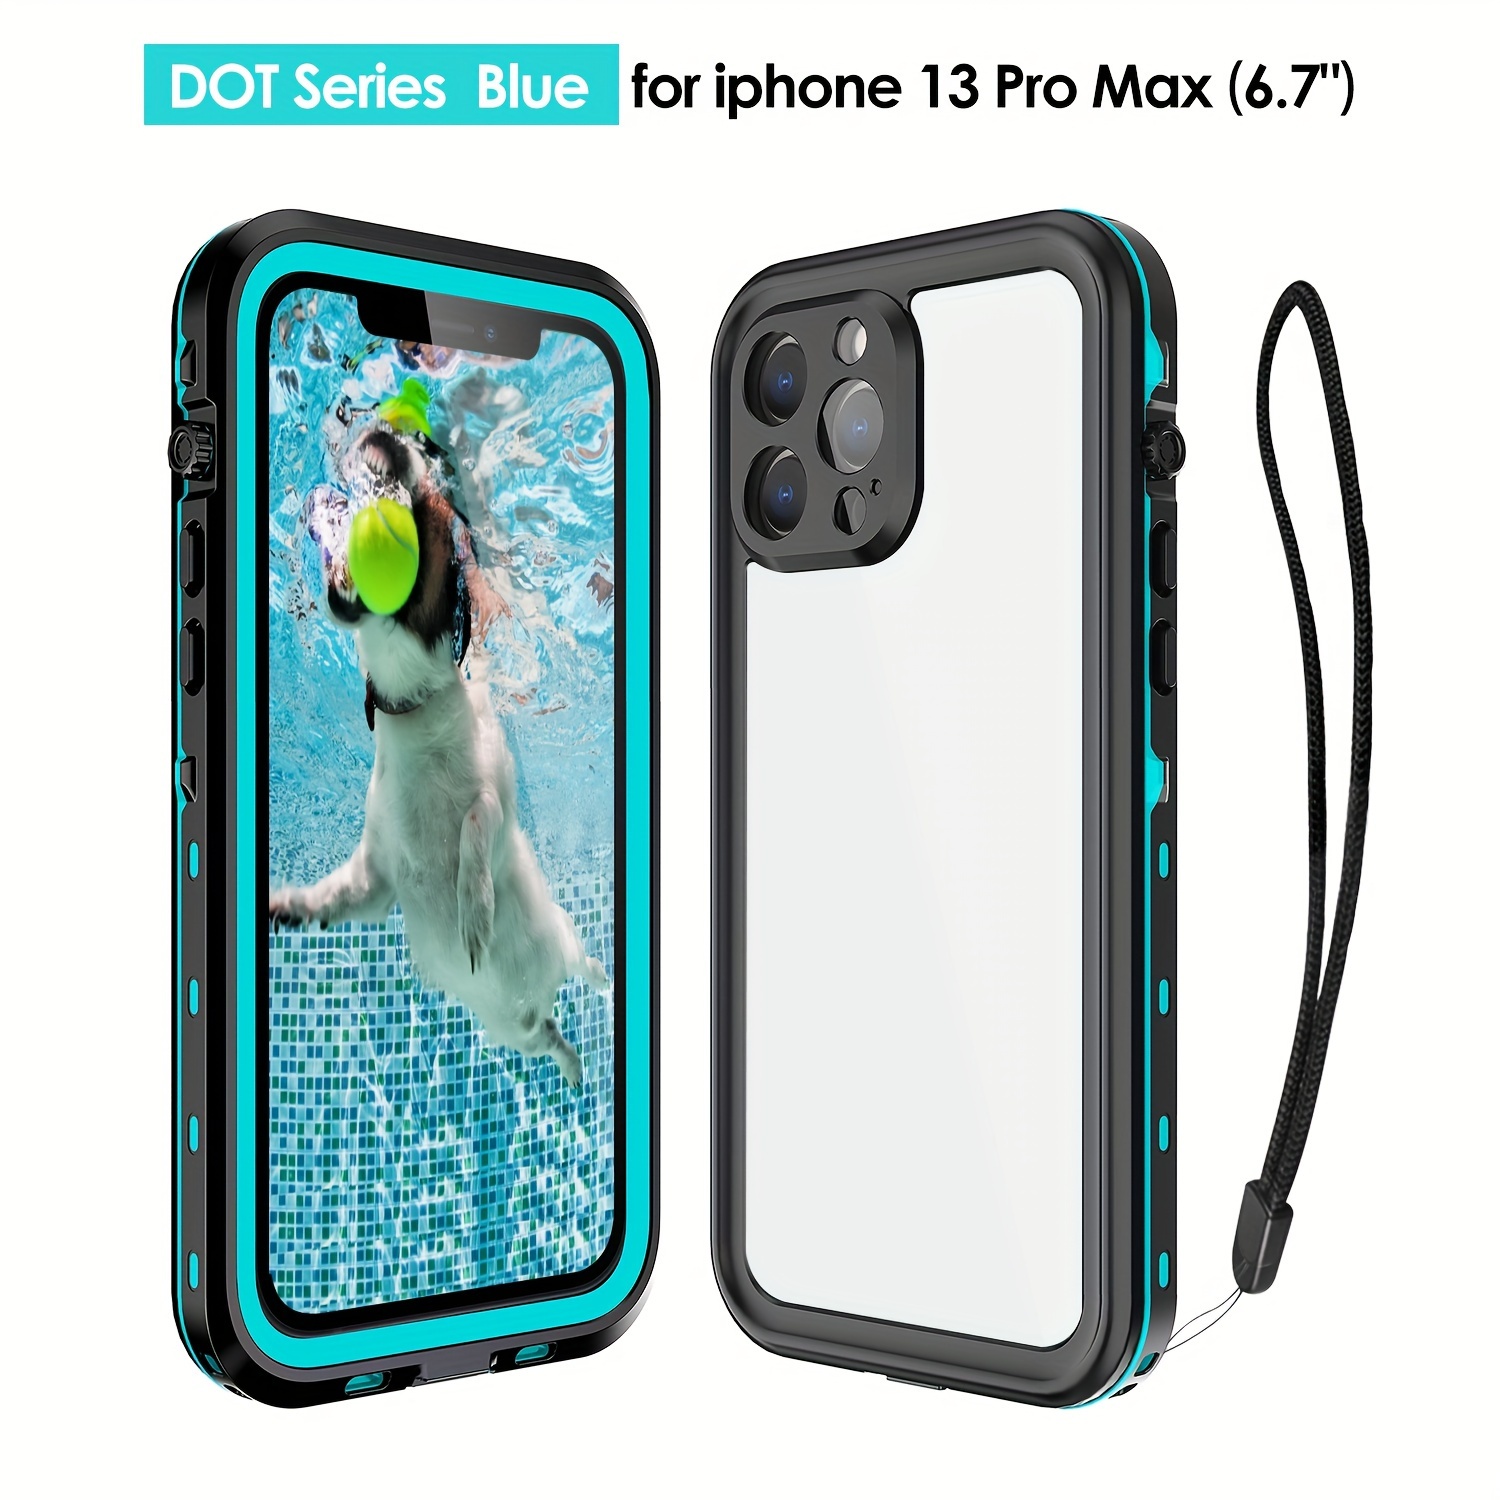 Transy Waterproof iPhone 13 Pro Max Case - Full Body Protection Case for  iPhone 13 Pro Max 6.7 inch Waterproof Shockproof Dustproof Phone Case with